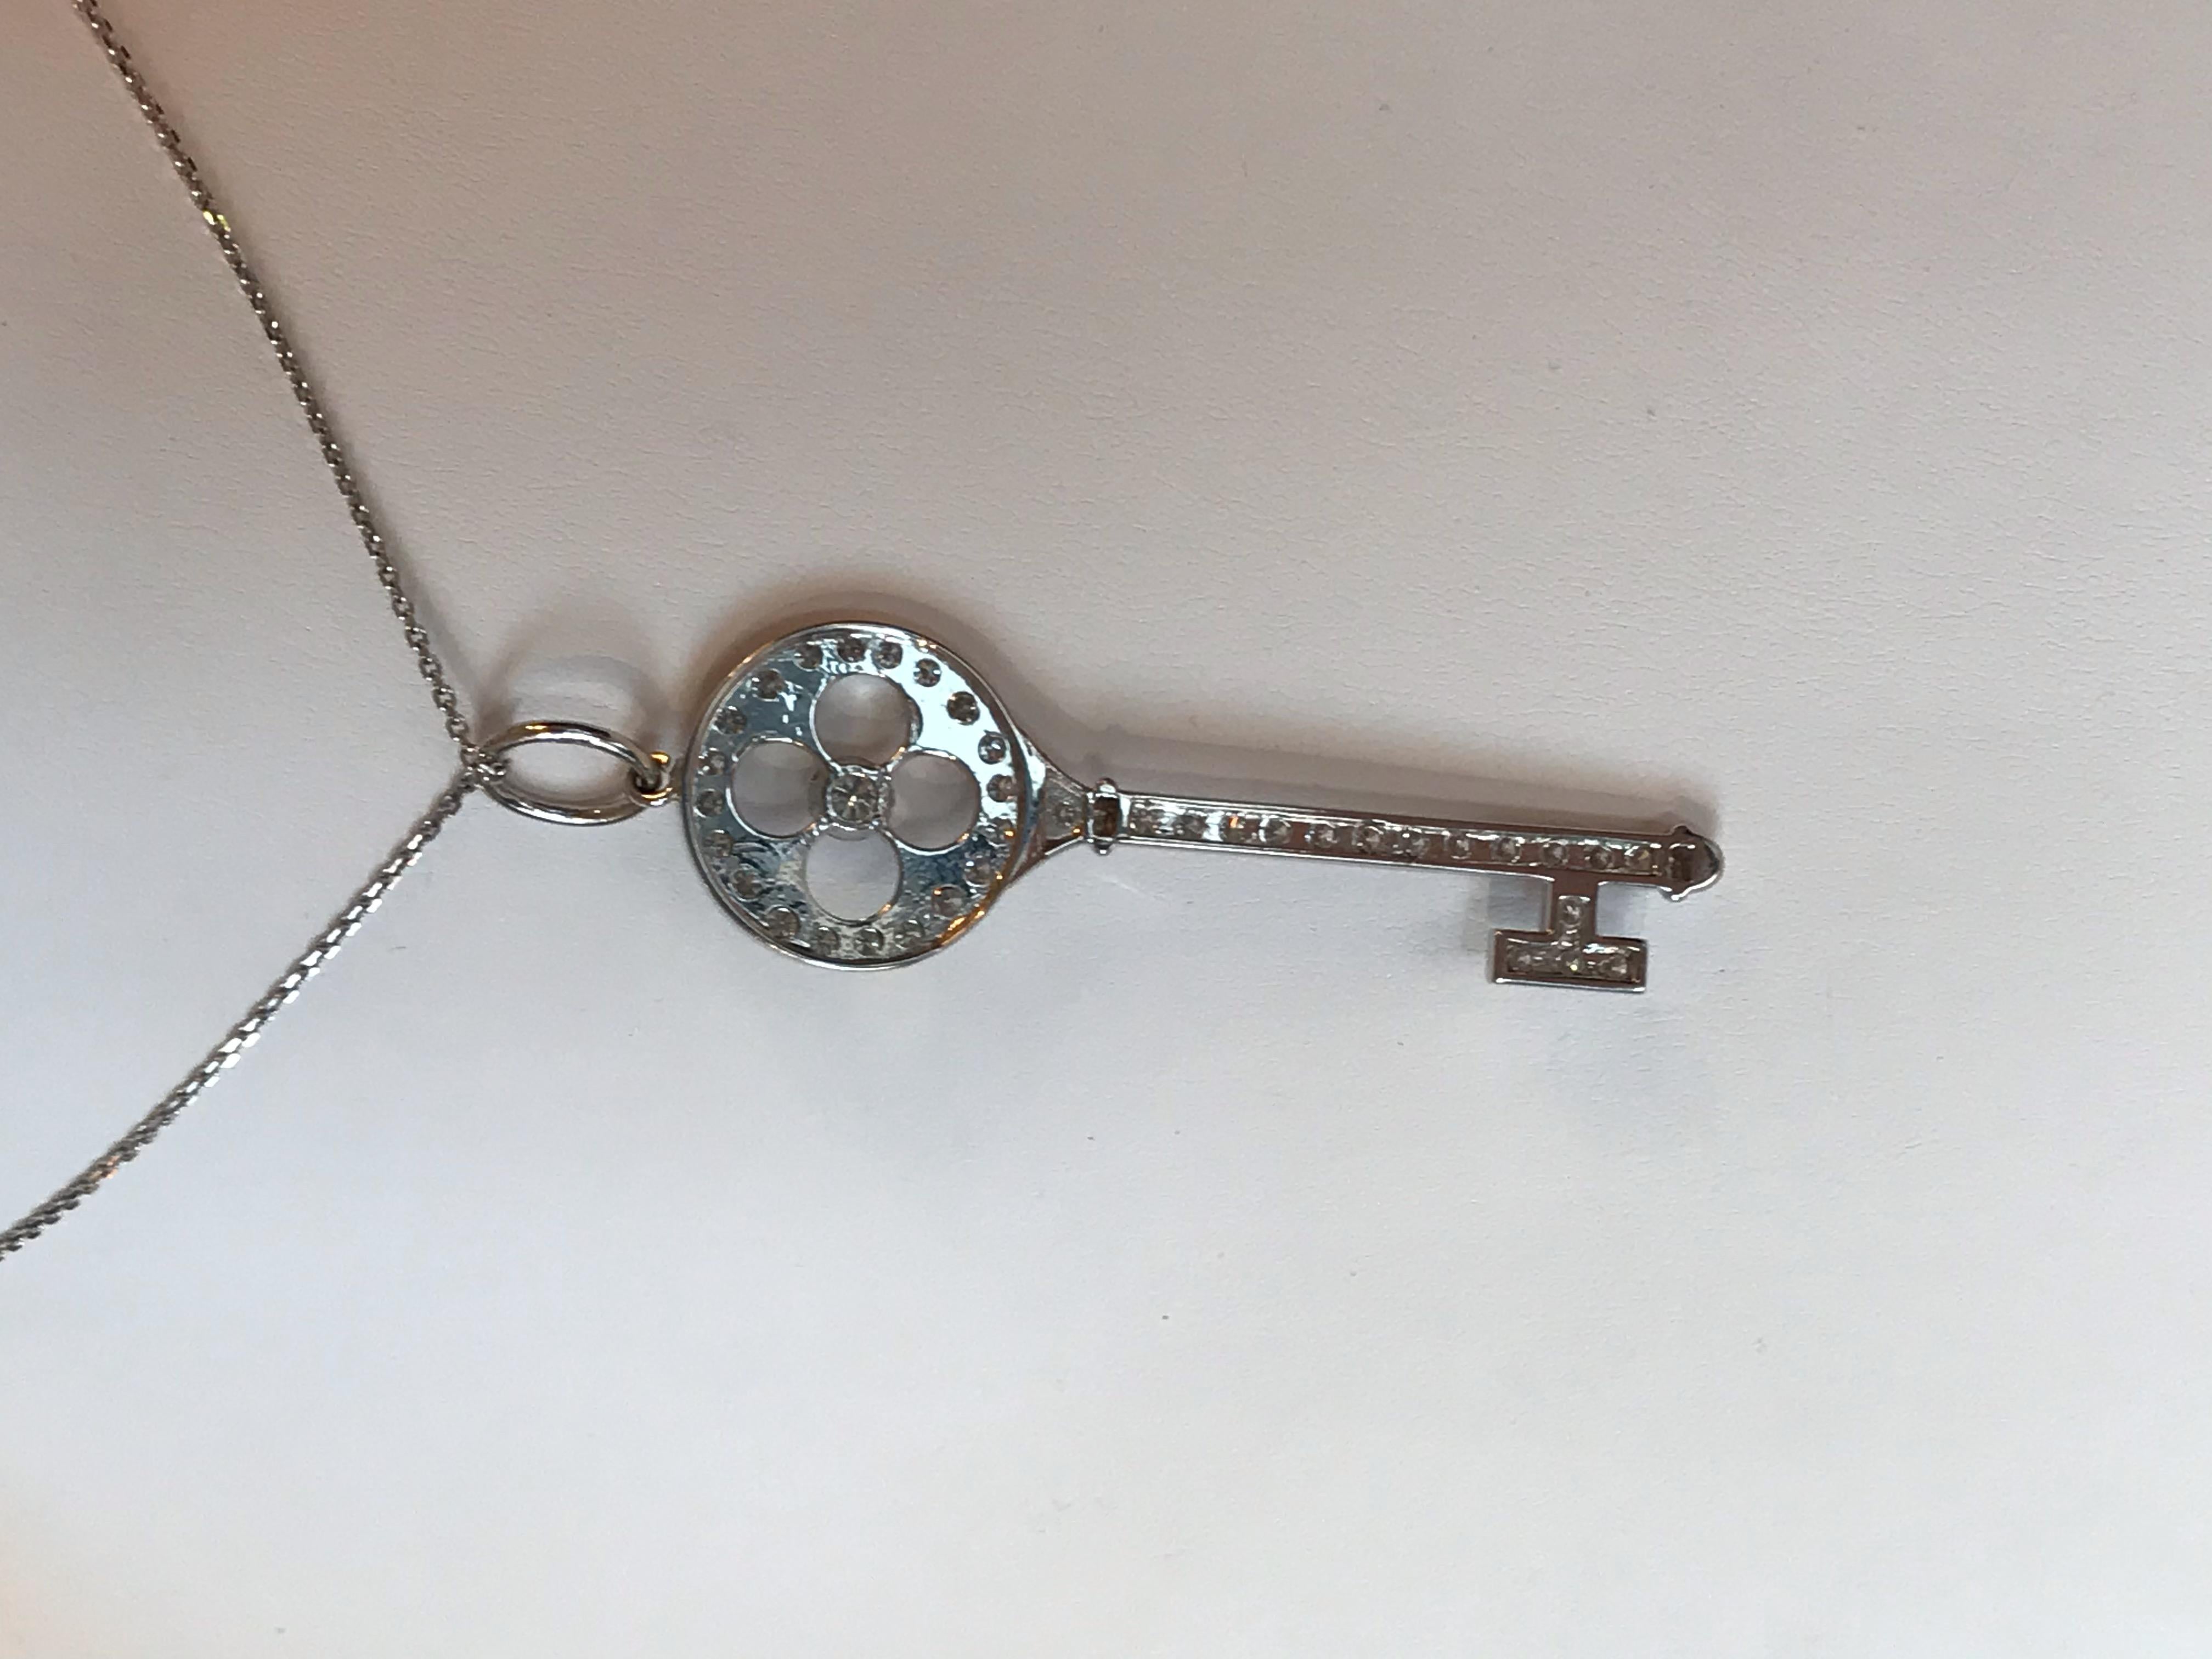 Tiffany & Co. Style 18 Carat Diamond 'Key' Pendant Set in 18 Carat White Gold In Excellent Condition For Sale In Malvern, Victoria